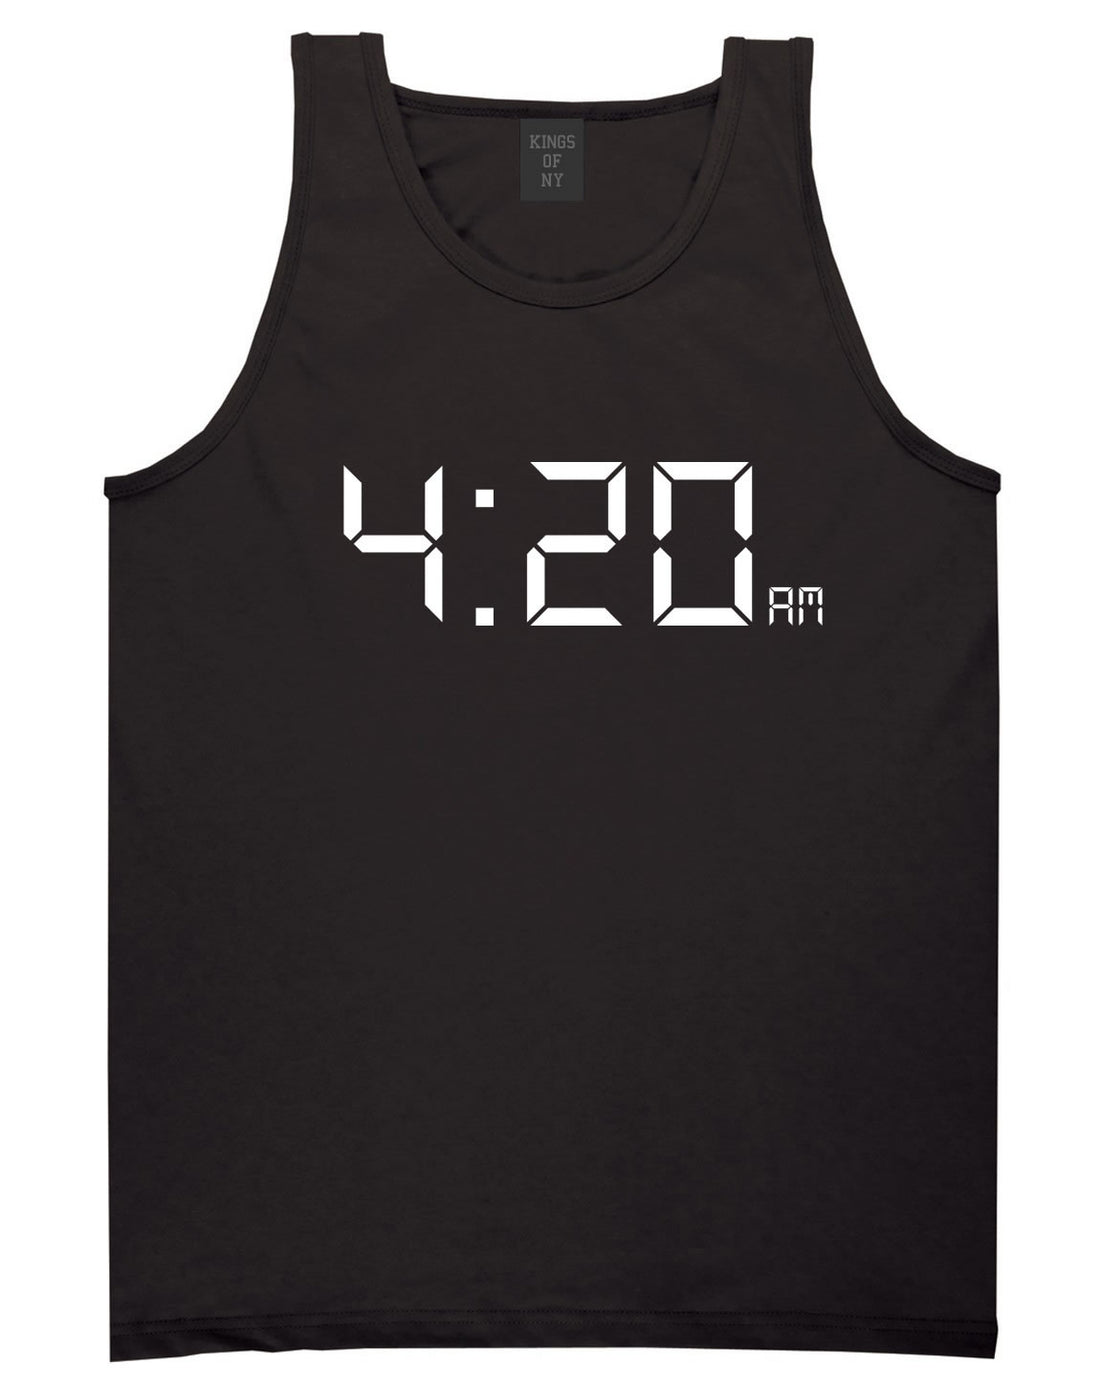 420 Time Weed Somker Tank Top in Black By Kings Of NY